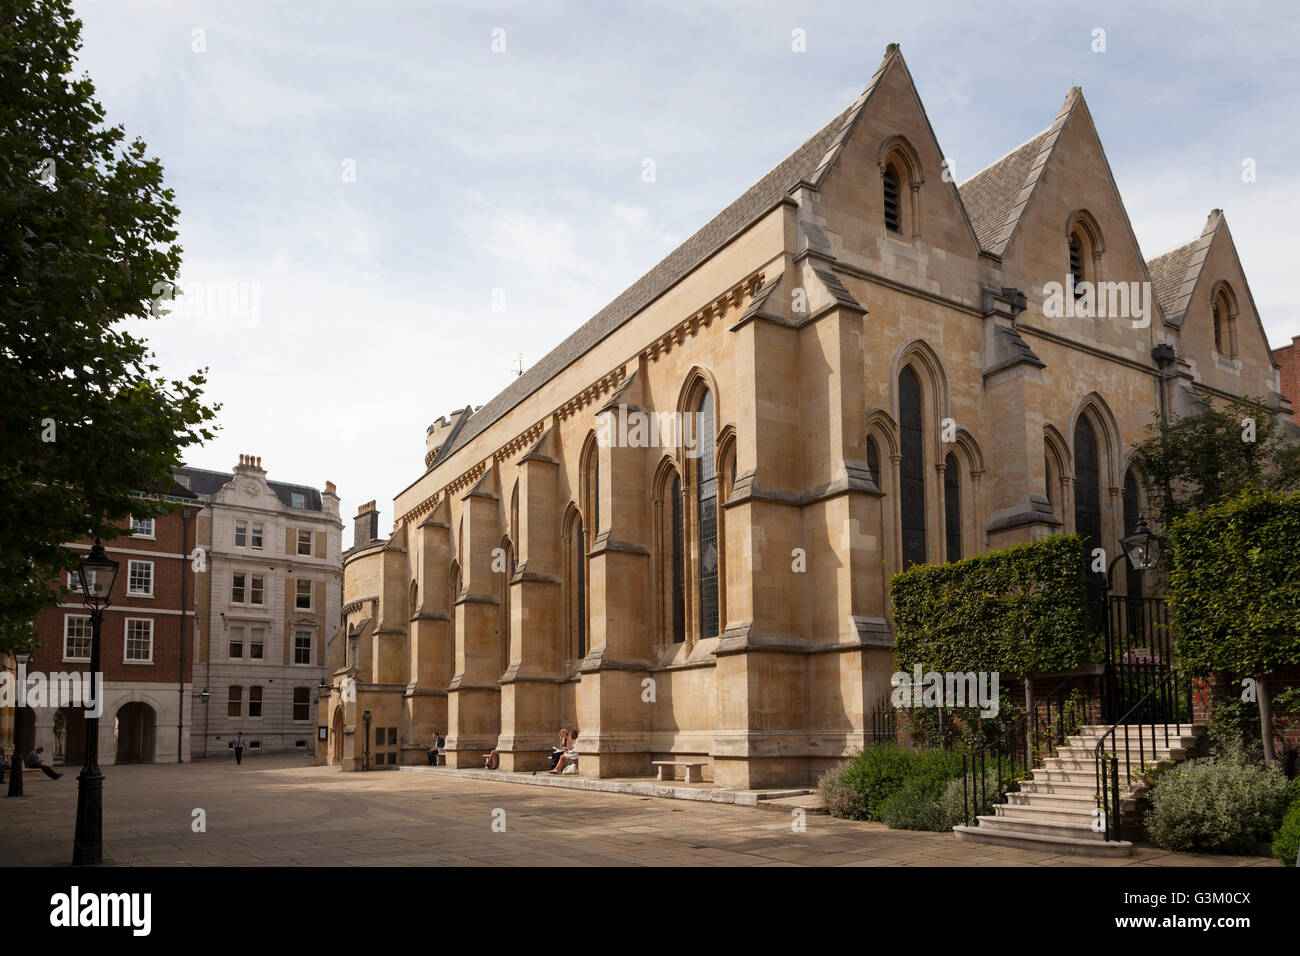 Temple Church, the church for the inner and middle temple, exteriors, London, England, United Kingdom, Europe Stock Photo